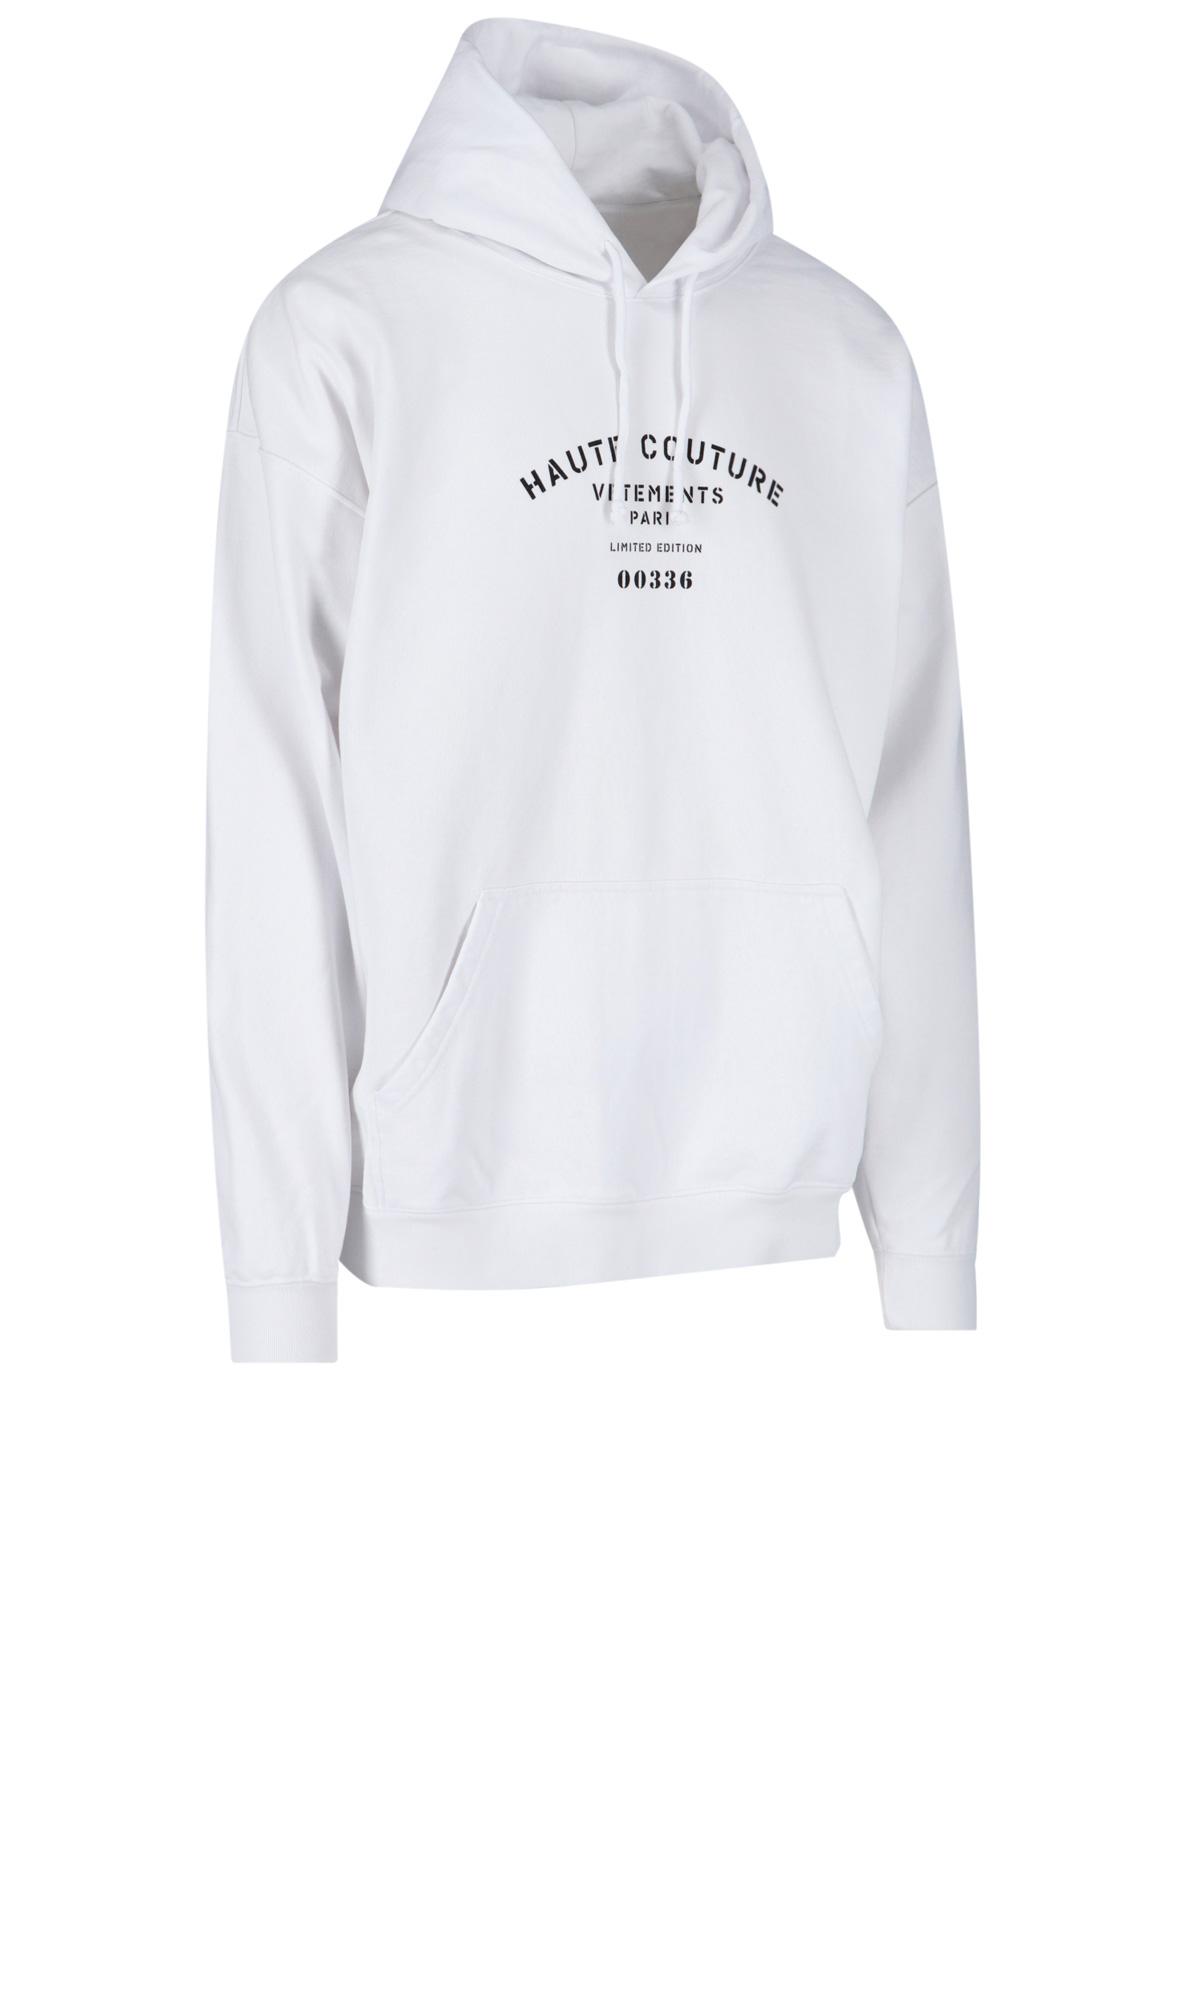 fup kompleksitet Gurgle Vetements 'haute Couture' Hoodie in White | Lyst